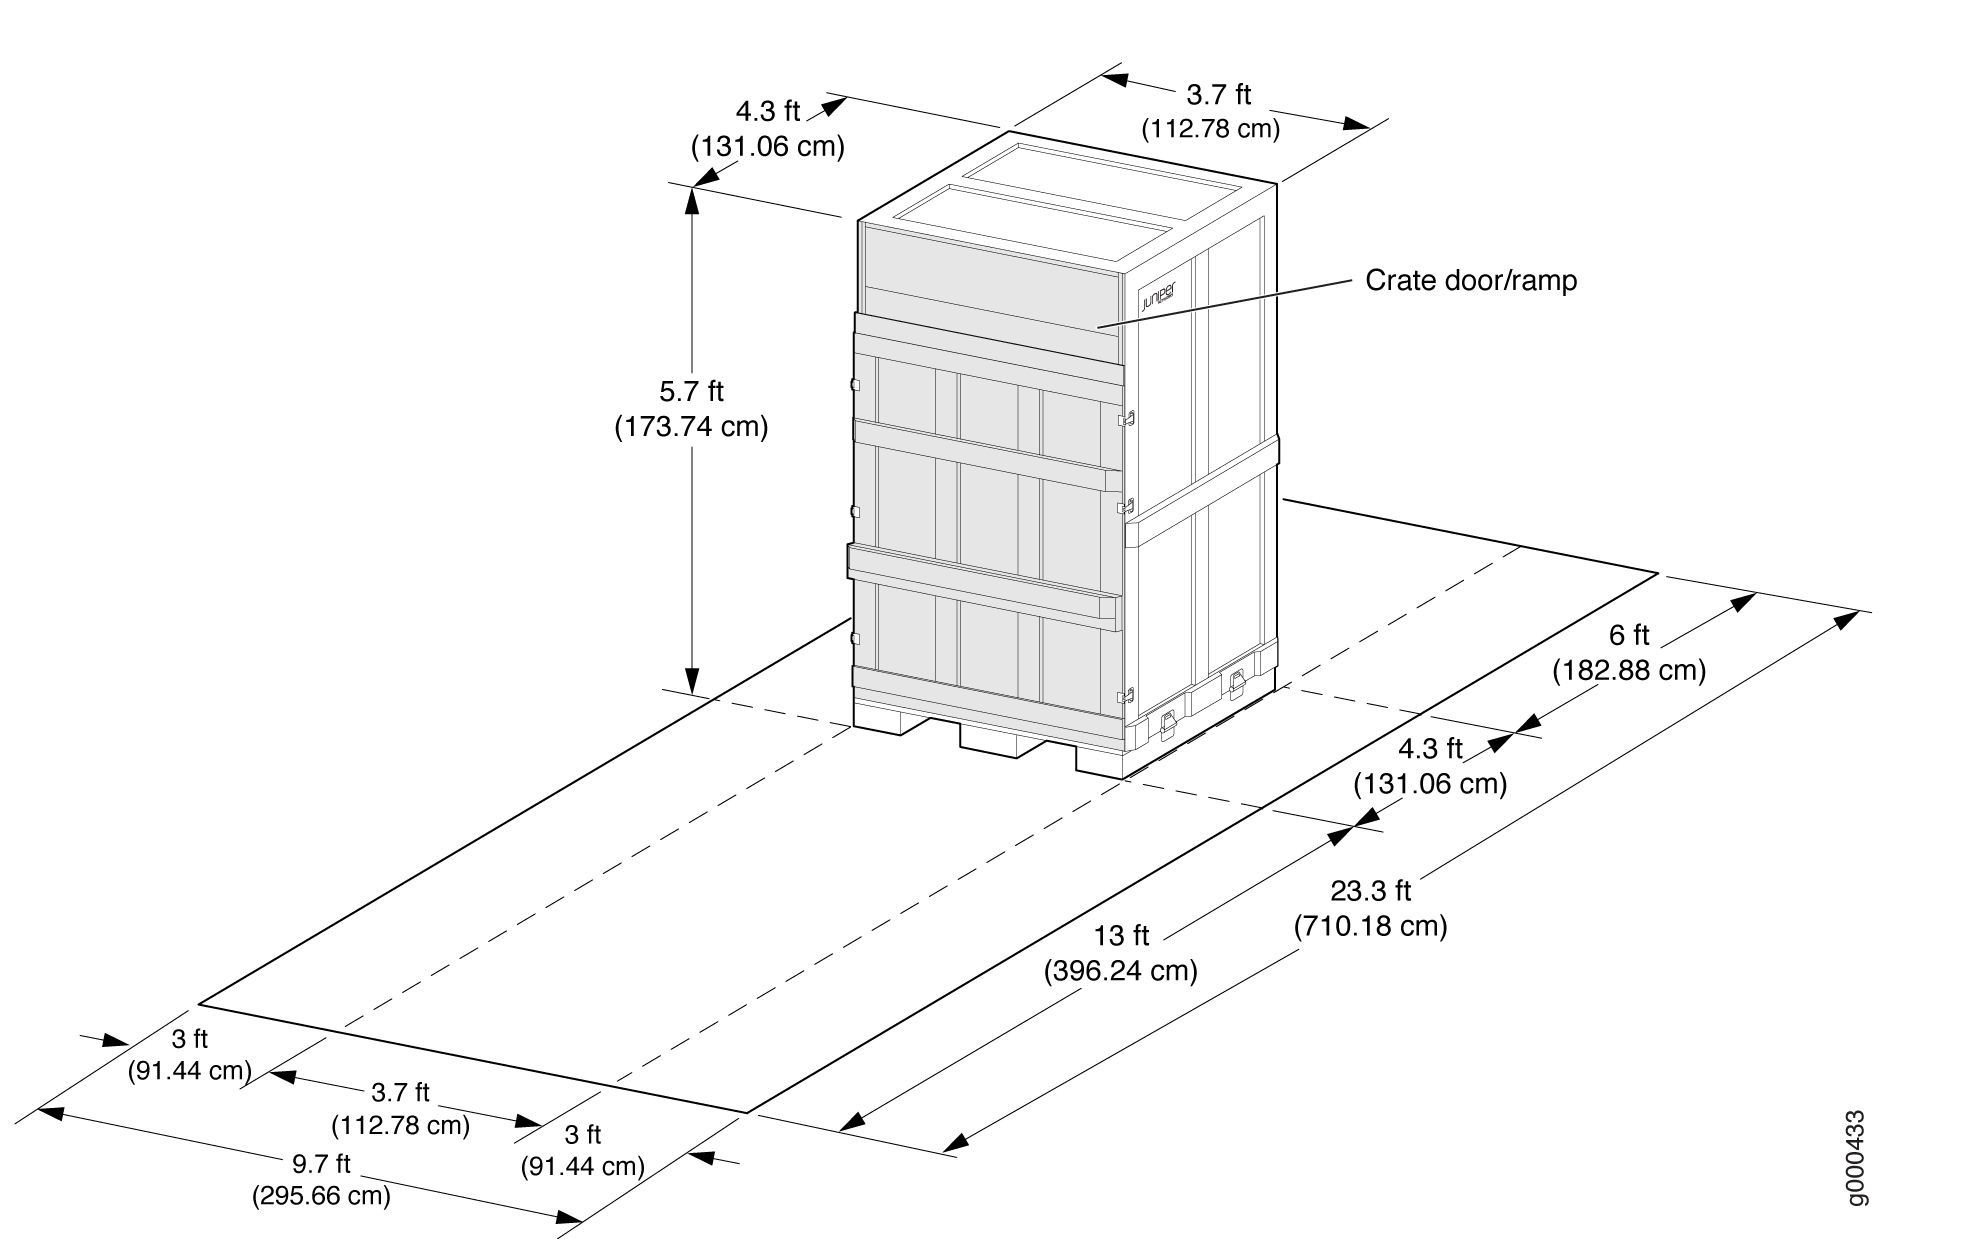 MX2008 Shipping Crate Dimensions (Larger)